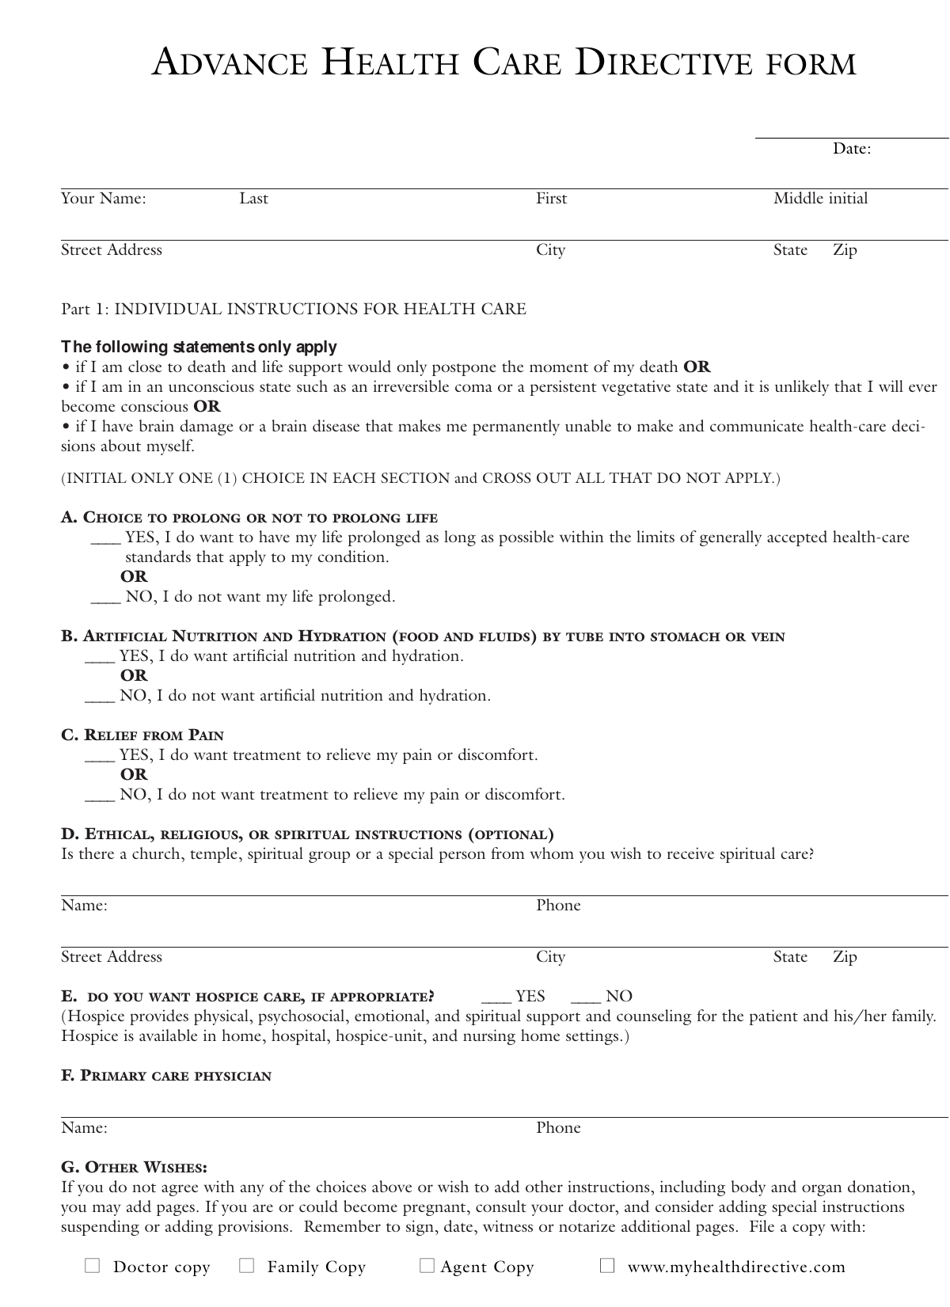 Advance Directive for Health Care Form - Hawaii, Page 1